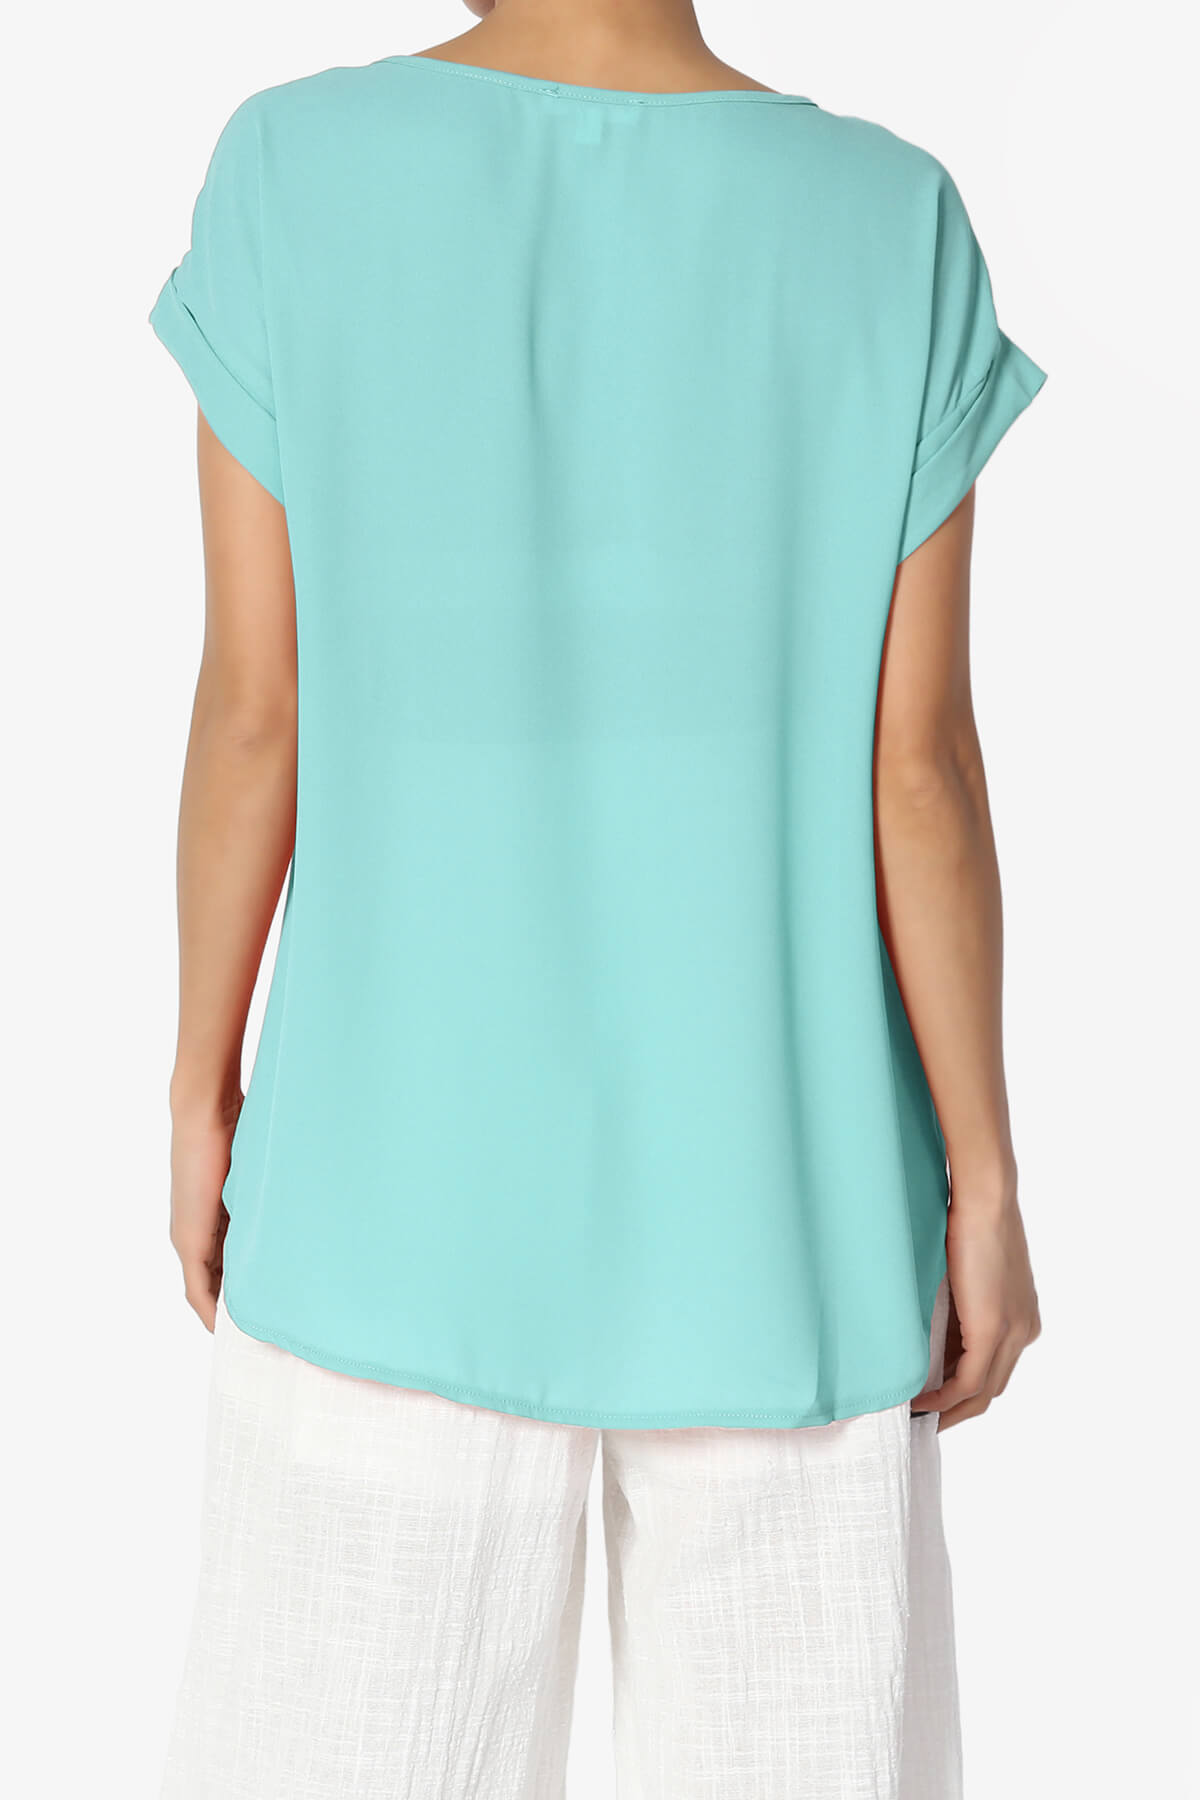 Load image into Gallery viewer, Juliette Boat Neck Chiffon Top ASH MINT_2
